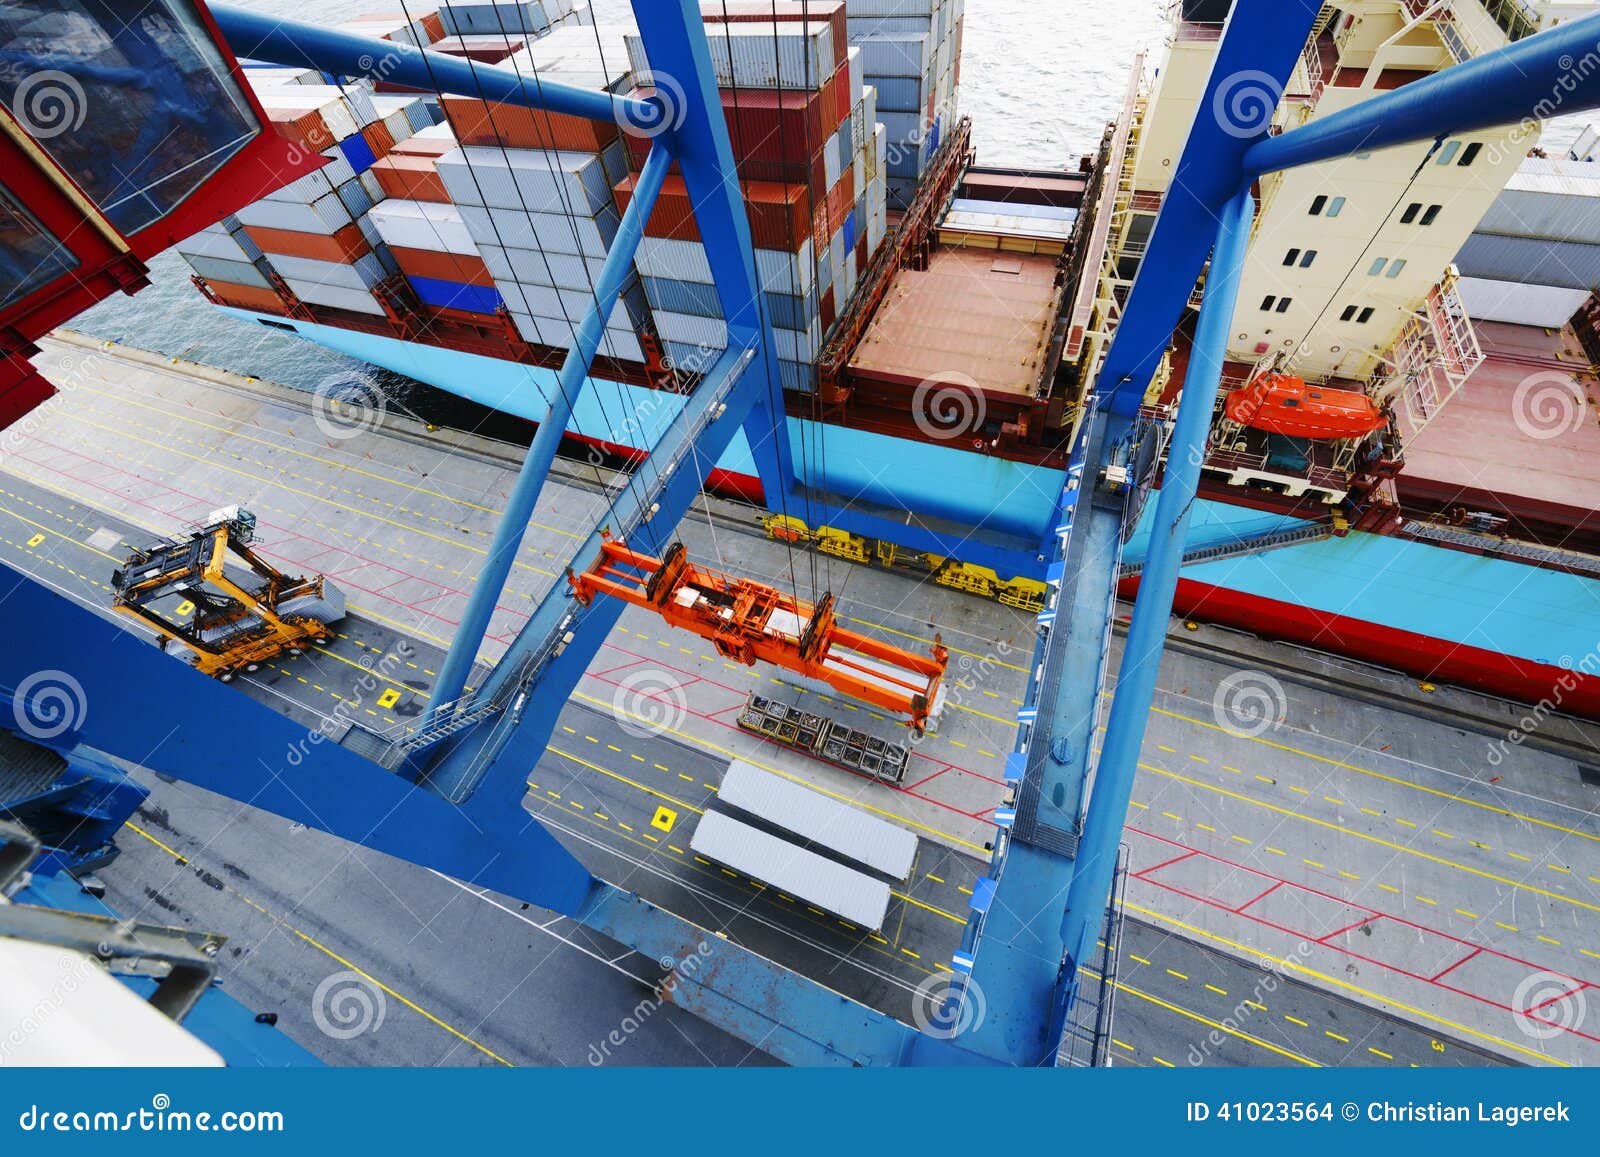 Container crane loading containers onto ship, shot from high above 